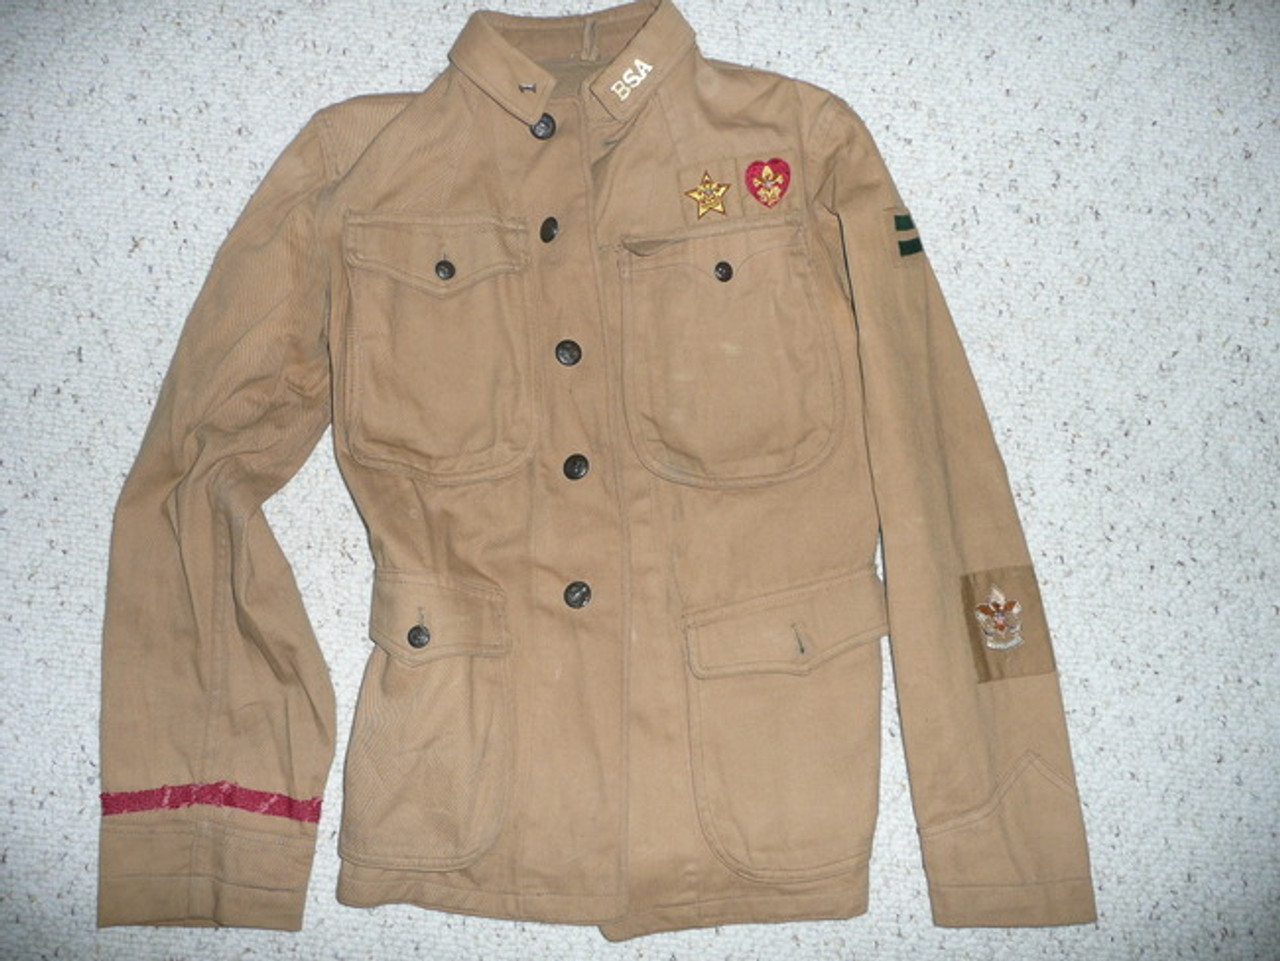 Teens Eisner Jacket with collar brass, 1st Class Patrol Leader, merit badges, early Patrol emblem and Type 1 Life and Star Patches